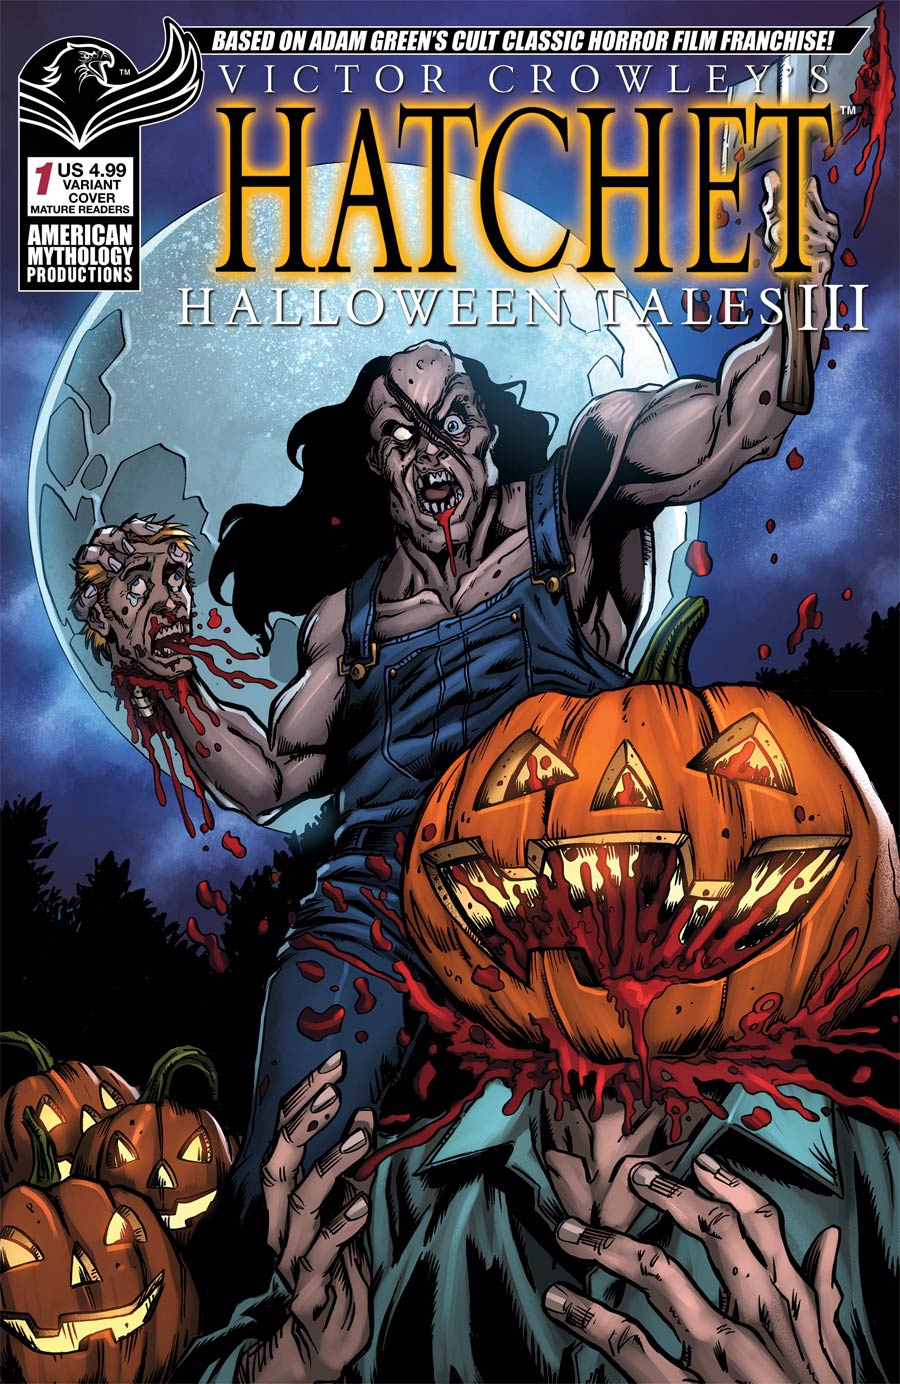 Victor Crowleys Hatchet Halloween Tales III Cover C Variant Puis Calzada Dont Lose Your Head Cover